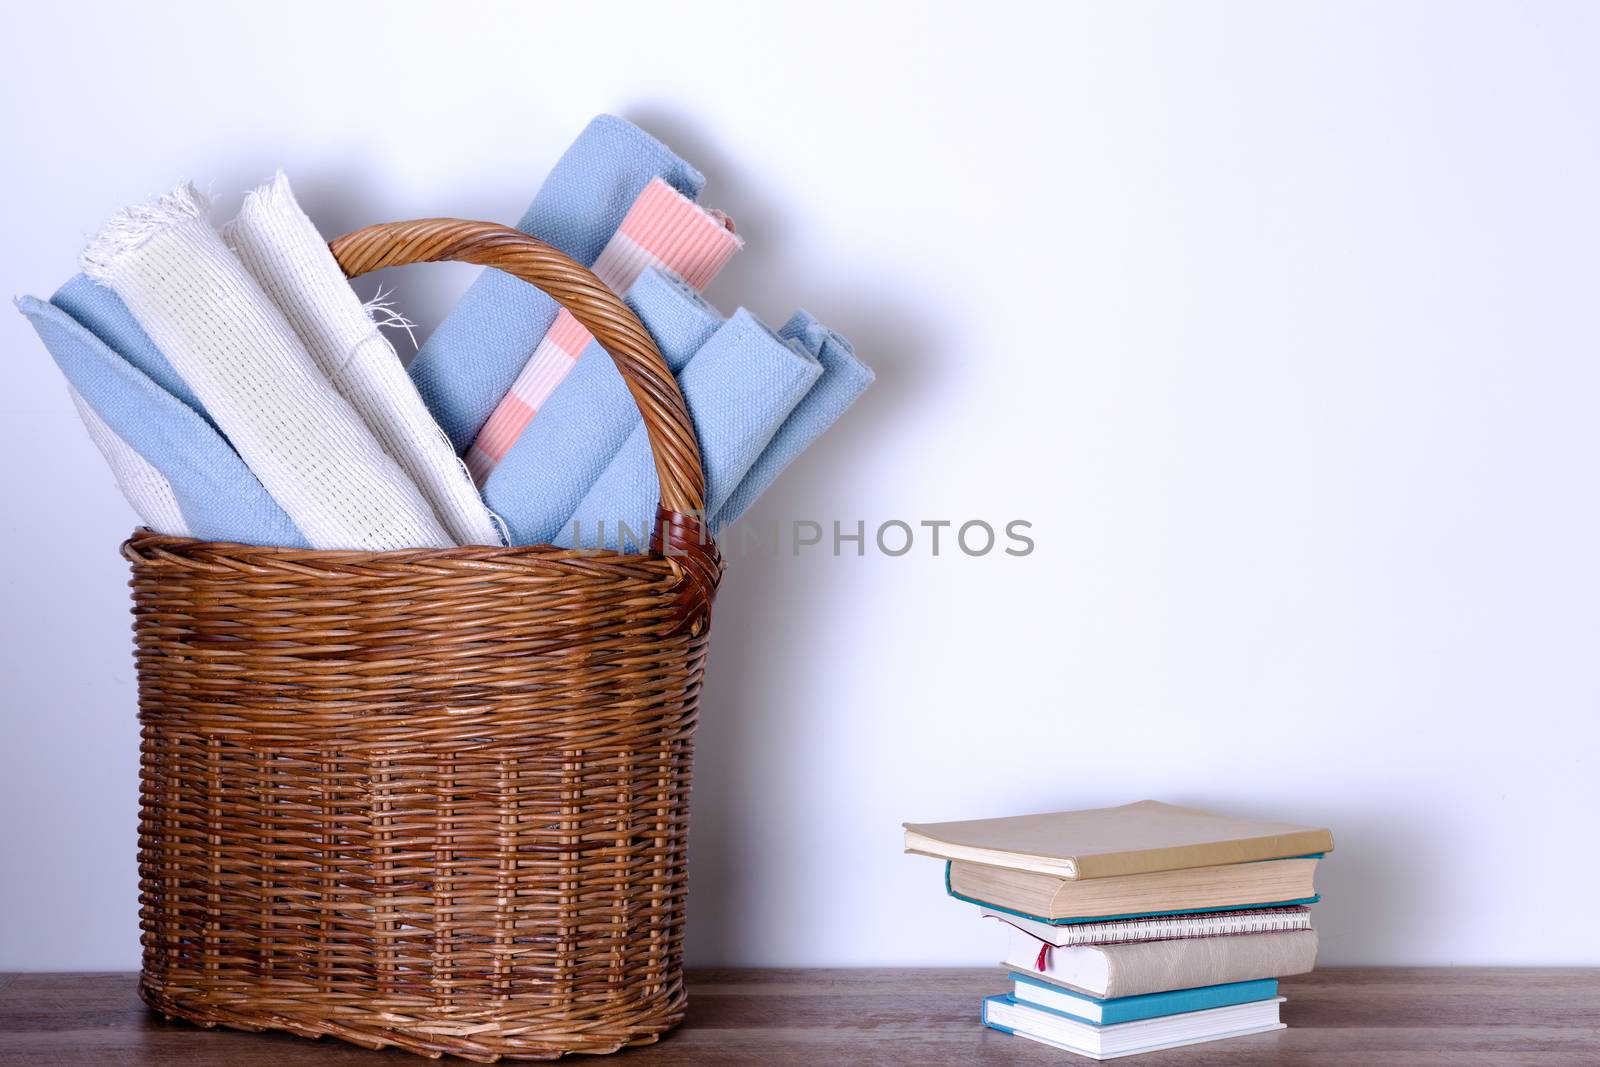 Rugs in Basket and Piled Books Against White Wall by coskun